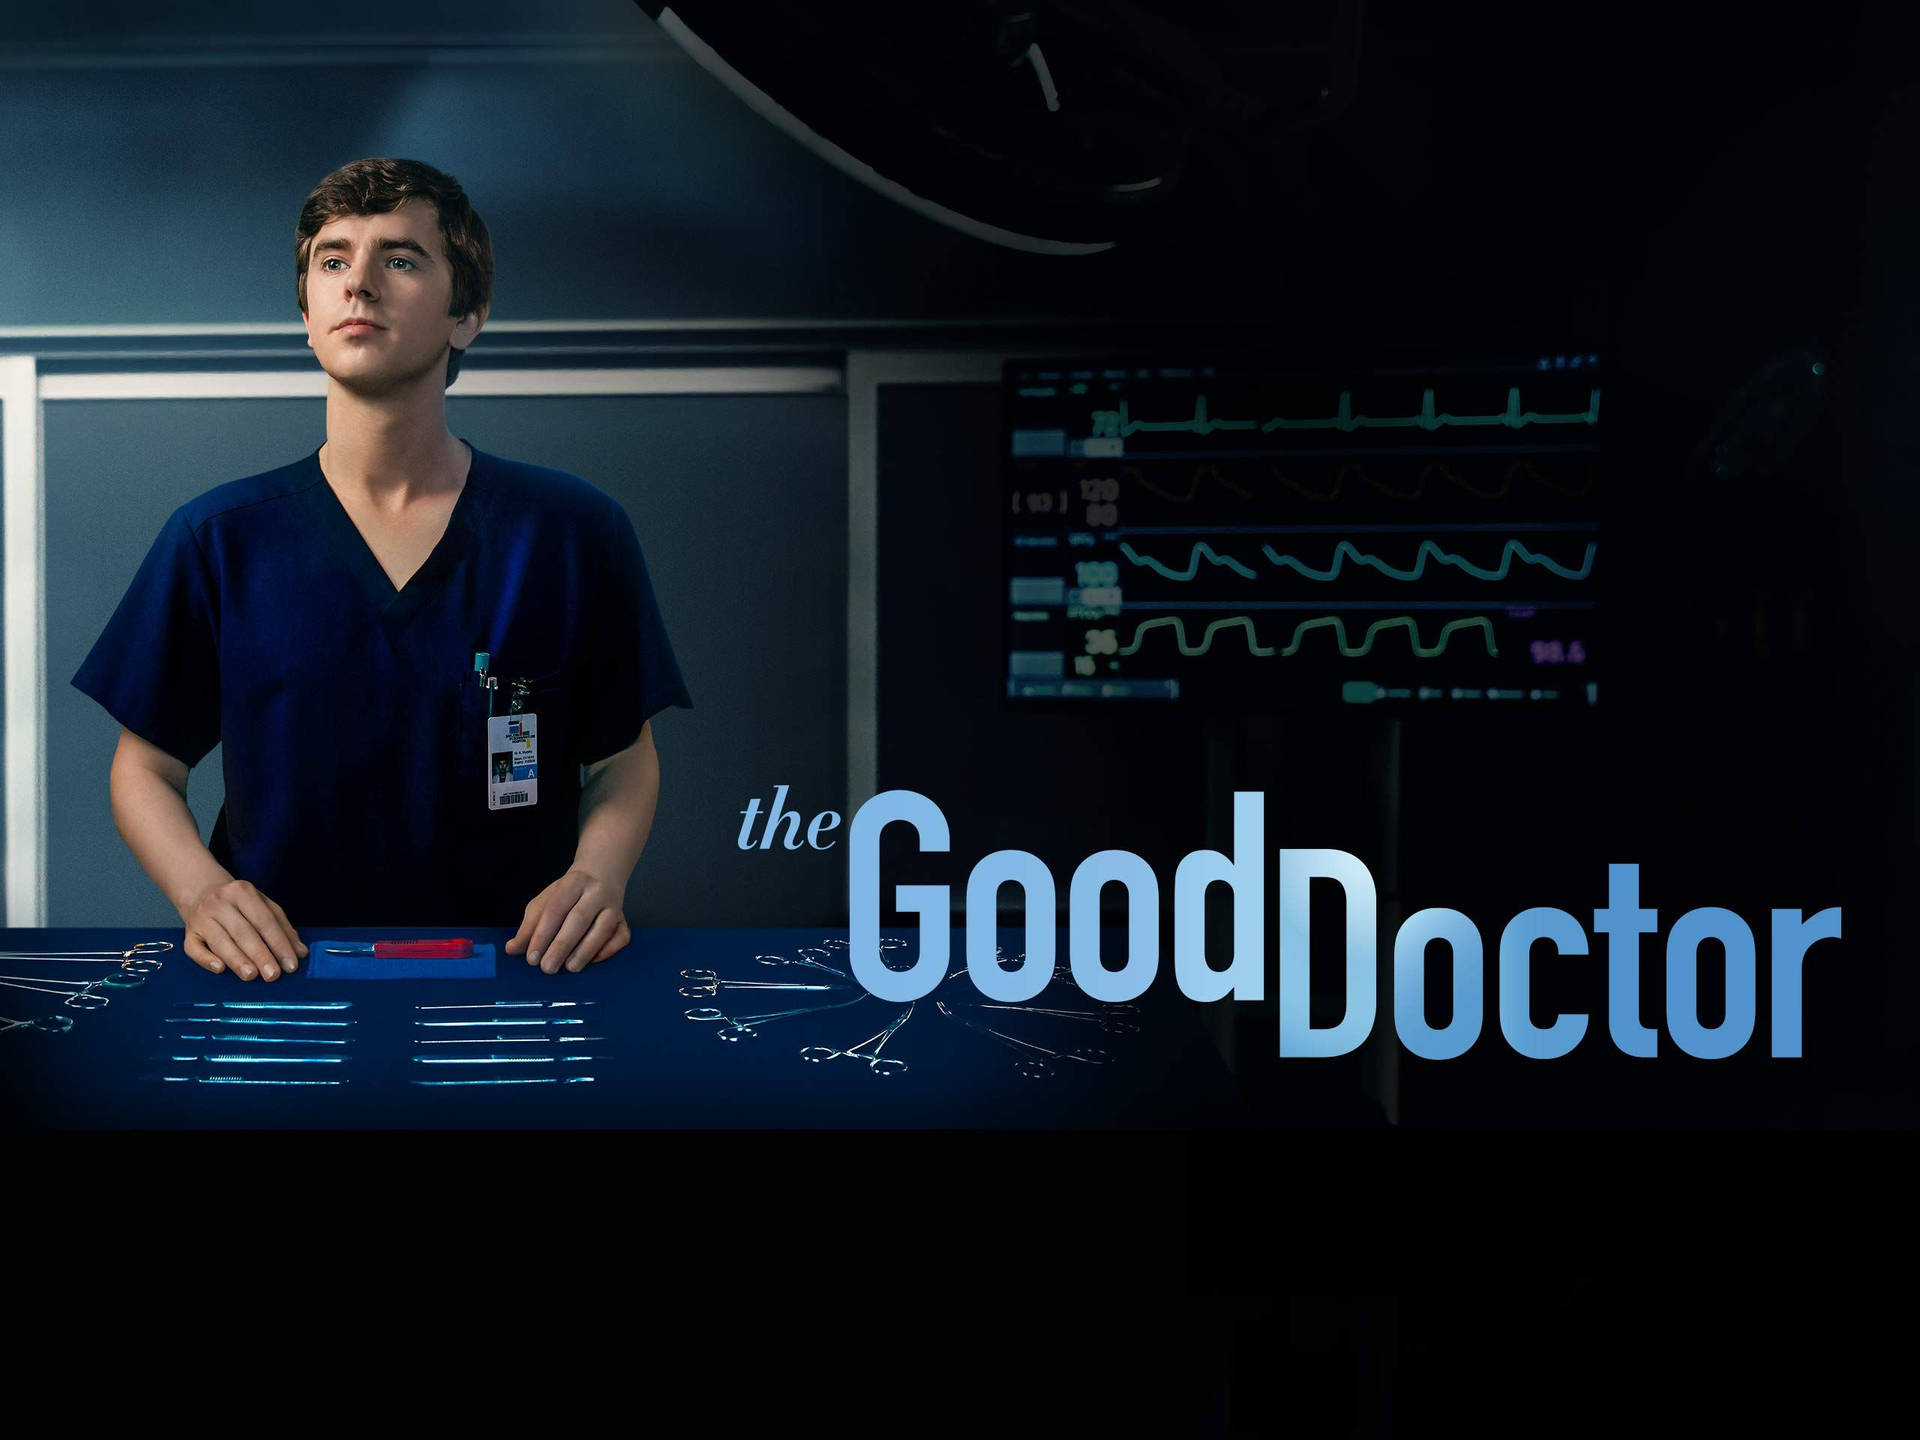 The Good Doctor Surgical Tools Background